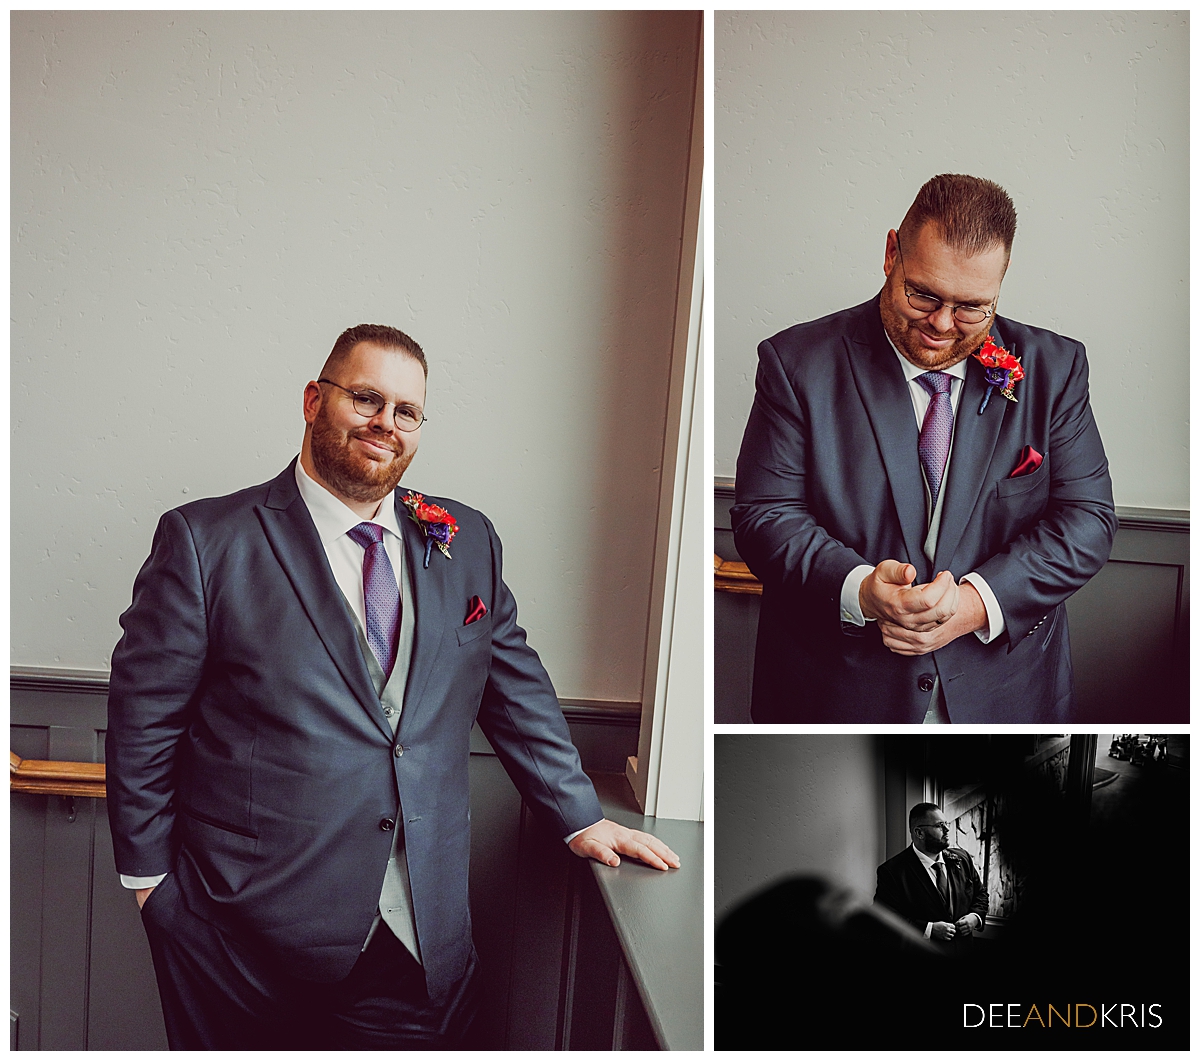 Three images: Left image of groom standing in front of window in suit with hand in pocket. Top right image of groom straightening cuff links in window light. Bottom right black and white image of groom from a distance.